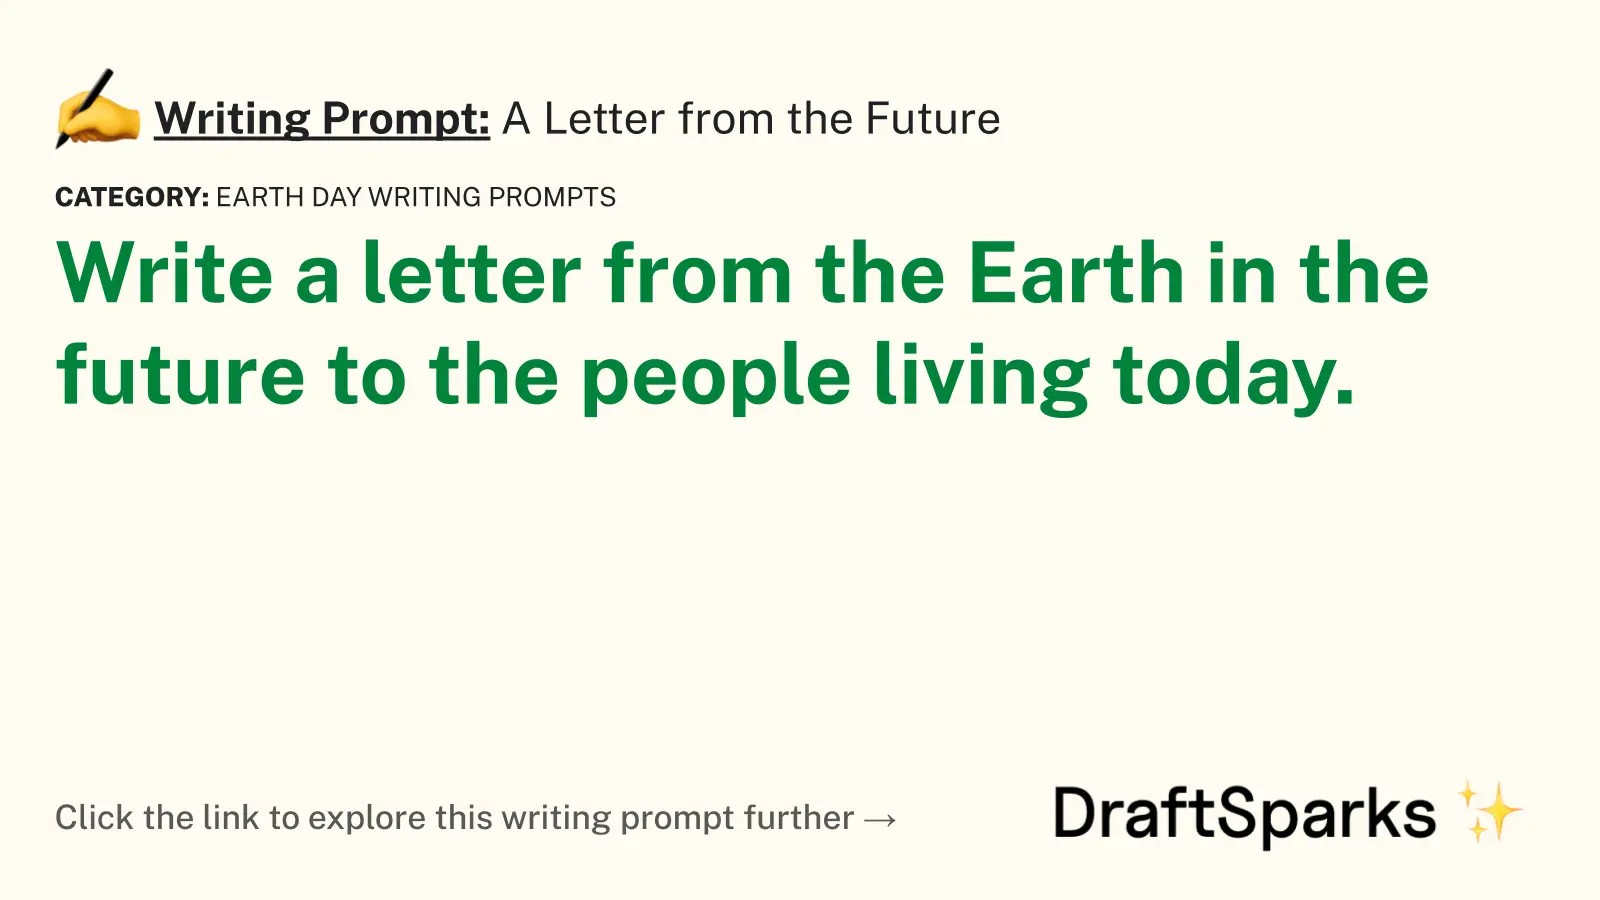 A Letter from the Future